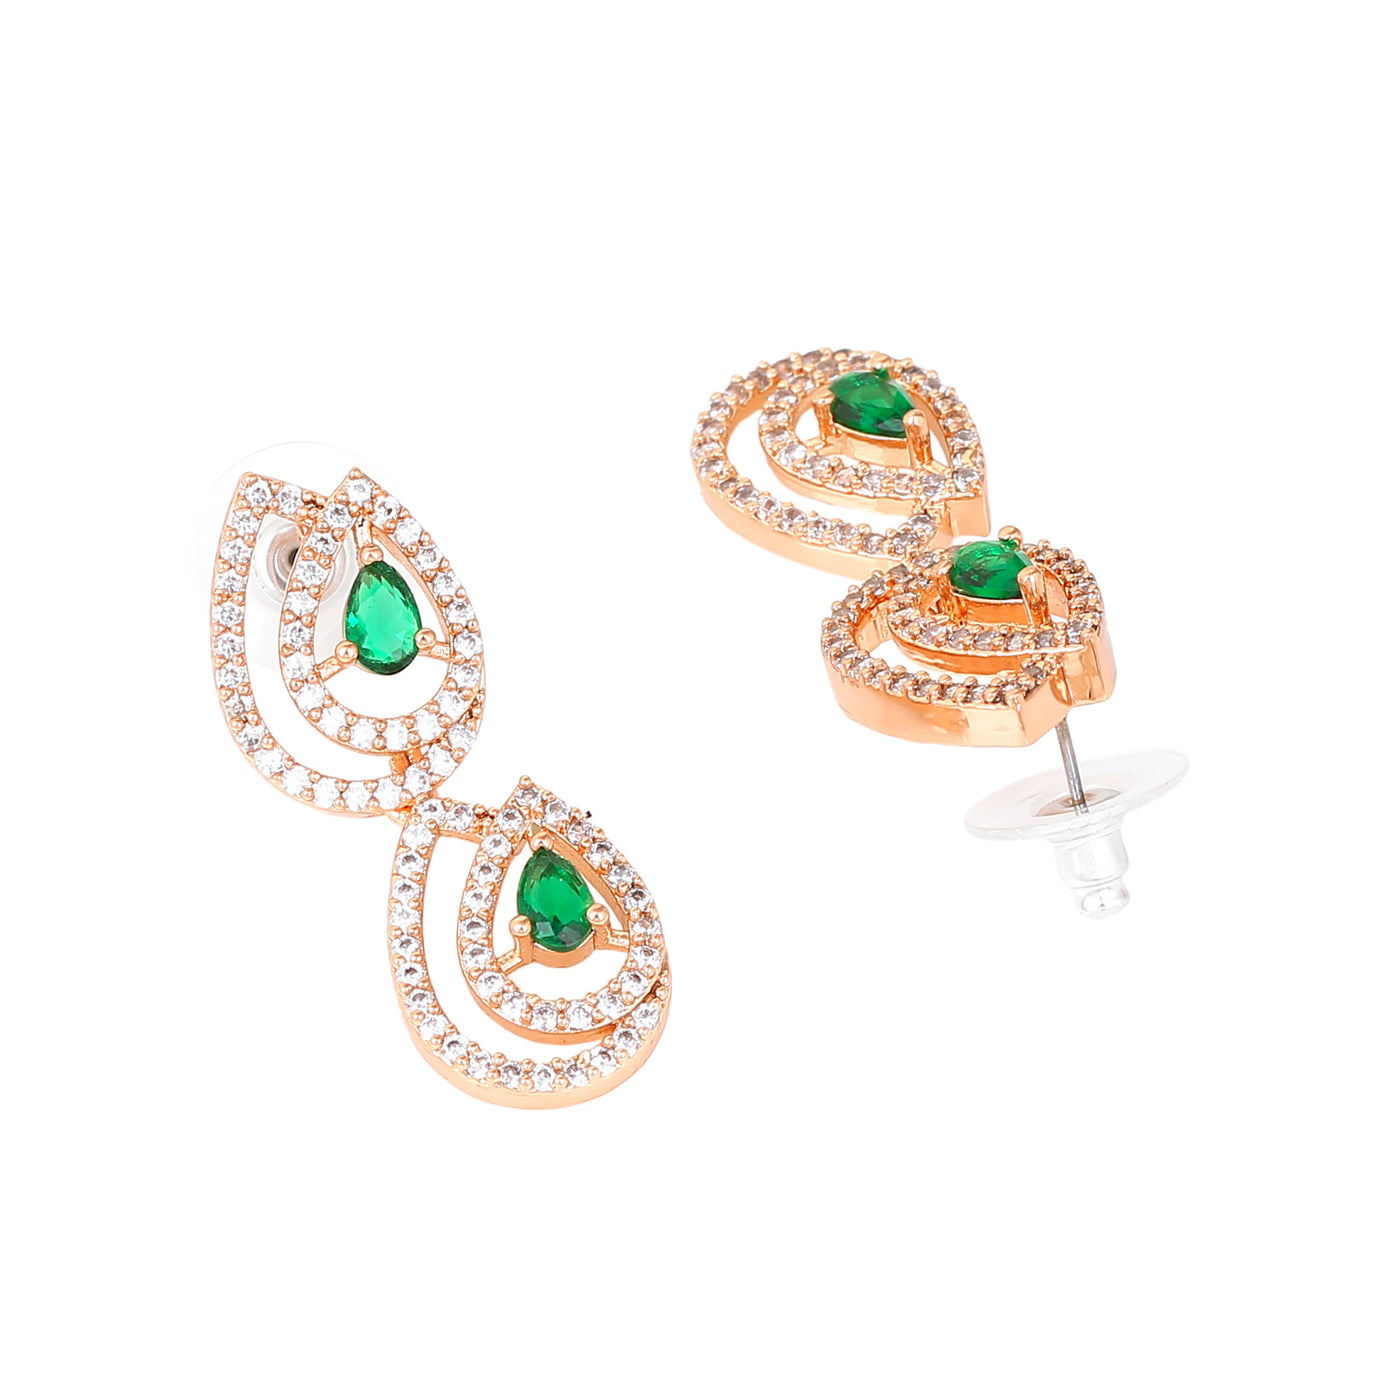 Estele Rose Gold Pated CZ Glossy Drop Designer Necklace Set with Emerald Stones for Women